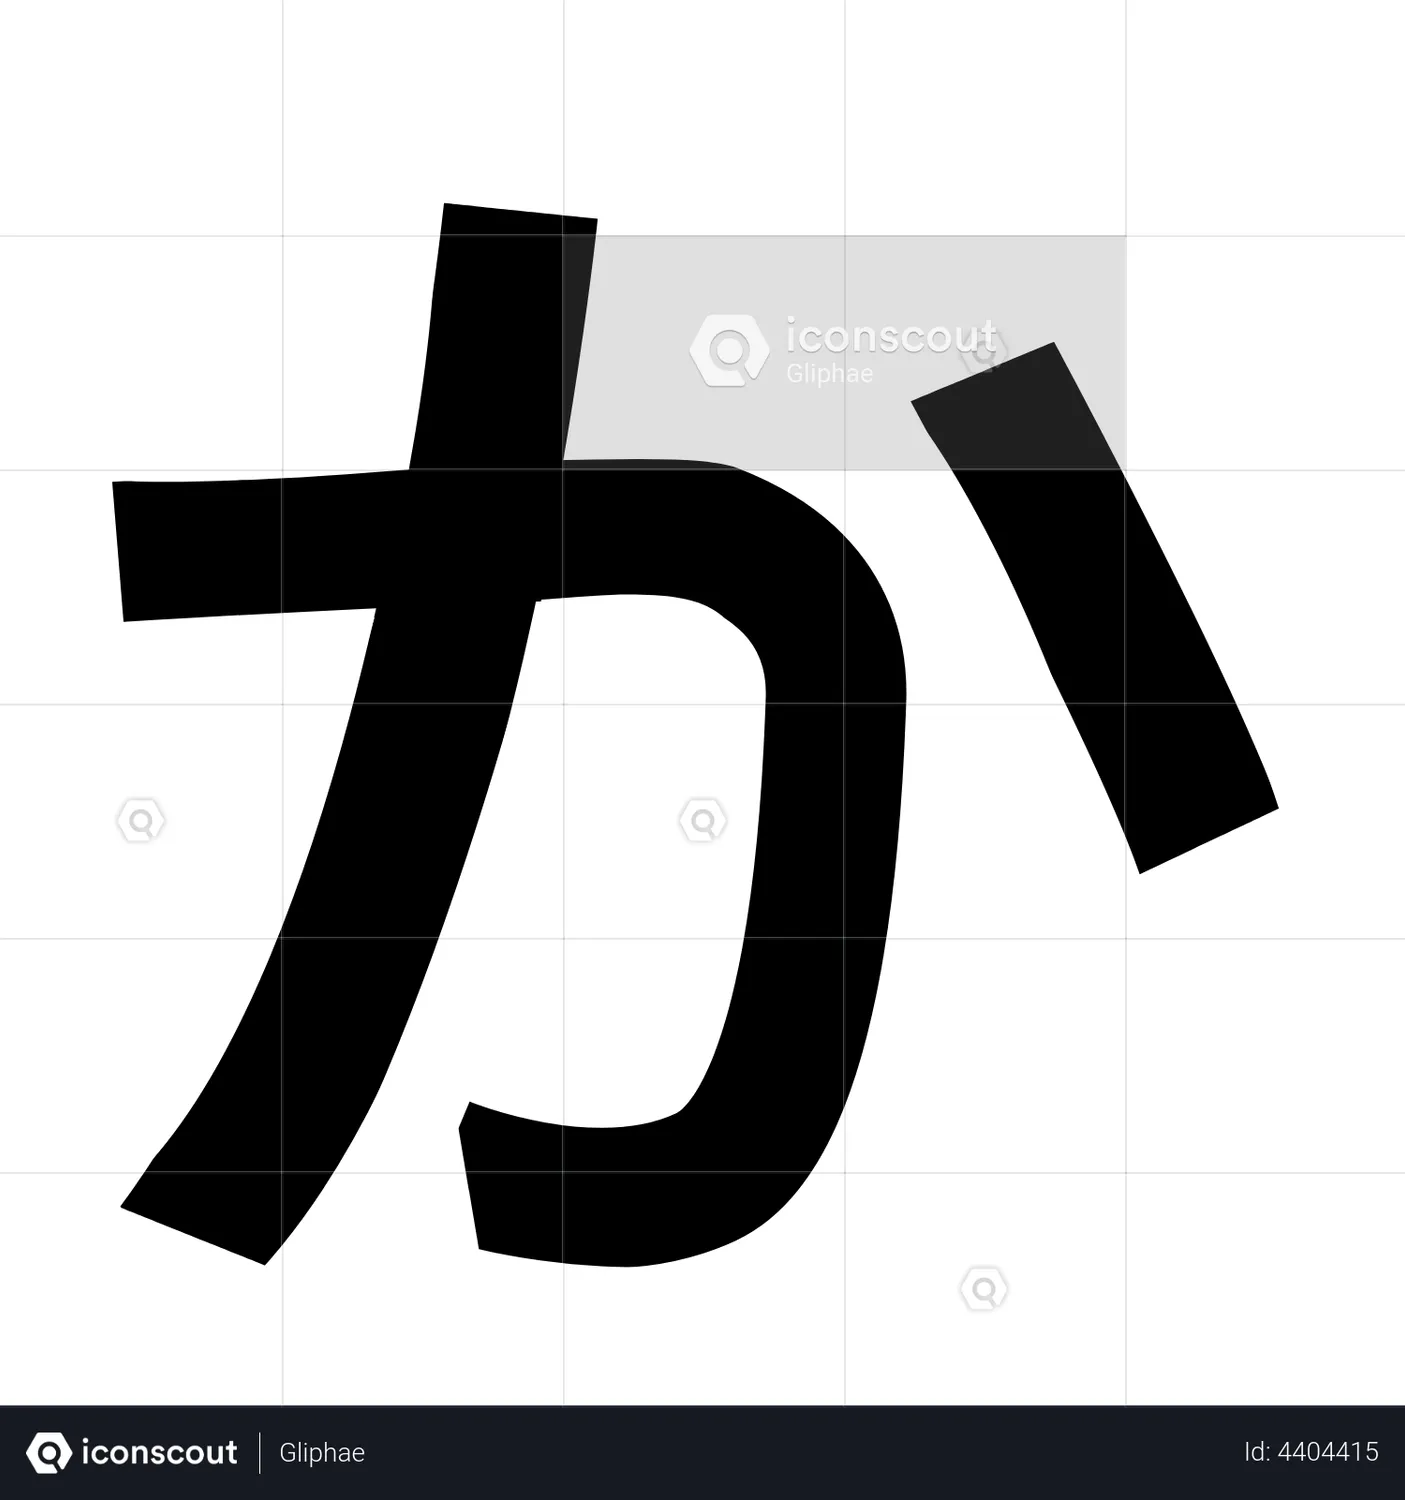 Japanese Hiragana - が - ga Animated Icon download in JSON, LOTTIE or ...